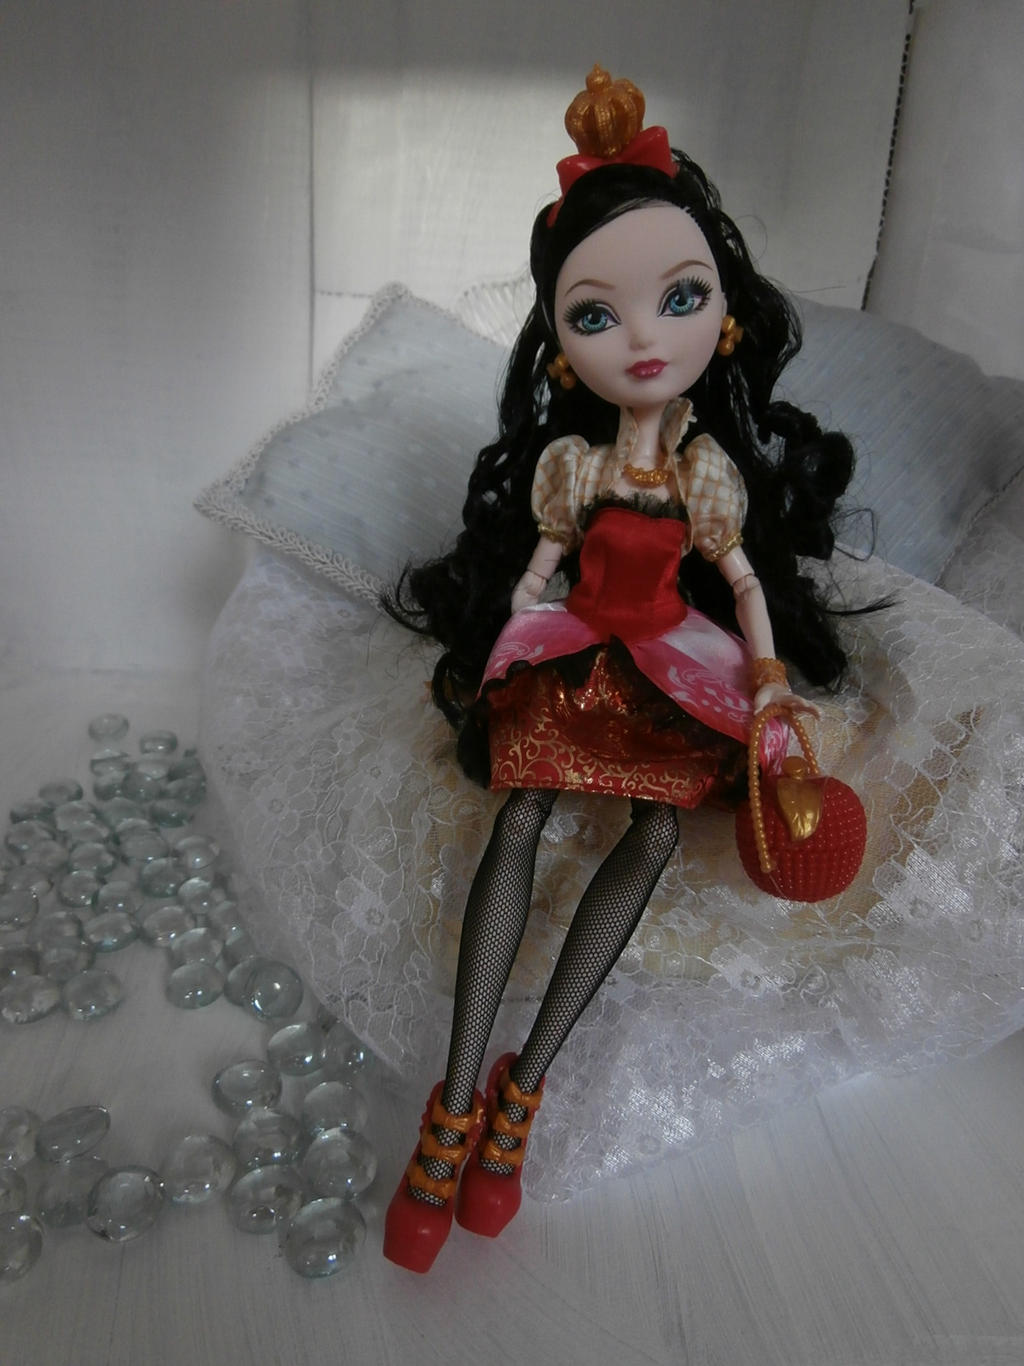 Apple White from Ever After High reroot